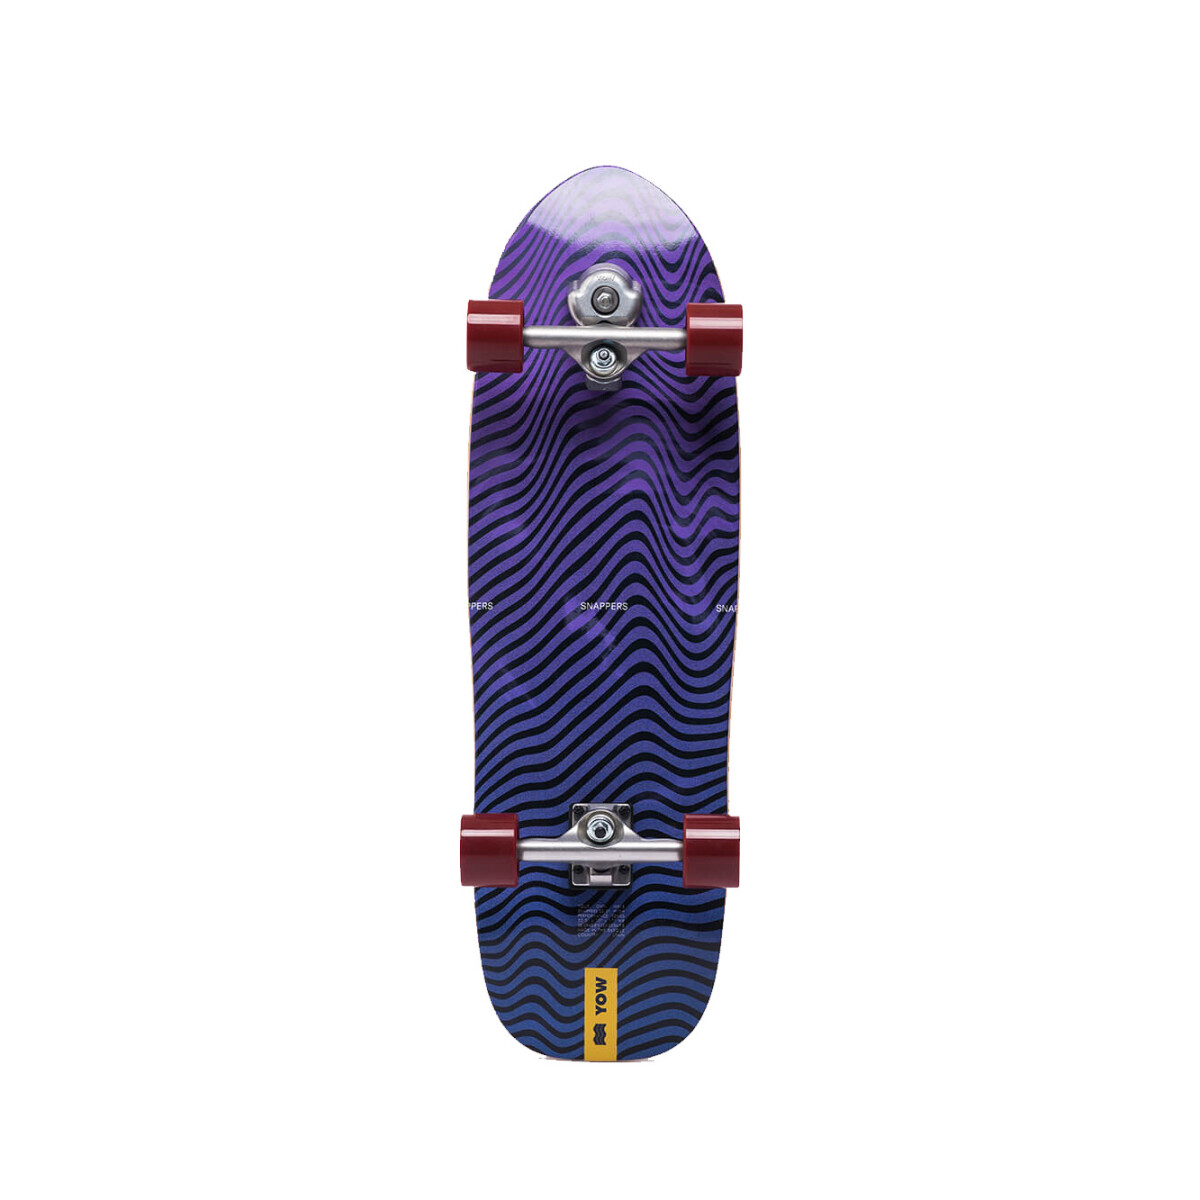 YOW Snappers 32.5" Surfskate Completo 